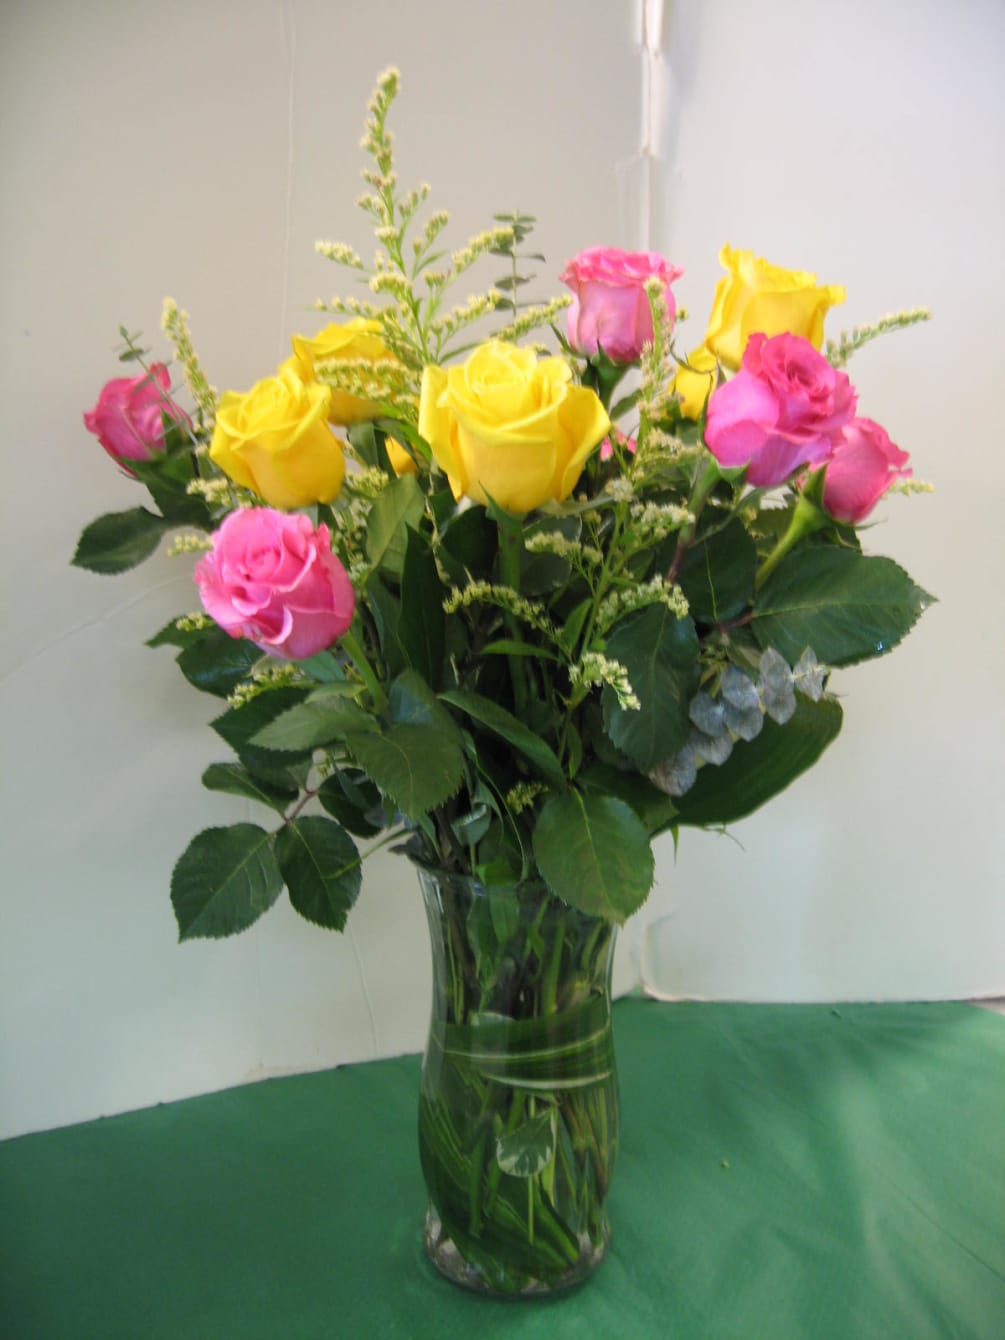 1 Dozen  Assorted  Colored Roses, Fancy Greens
Call for Color Preference